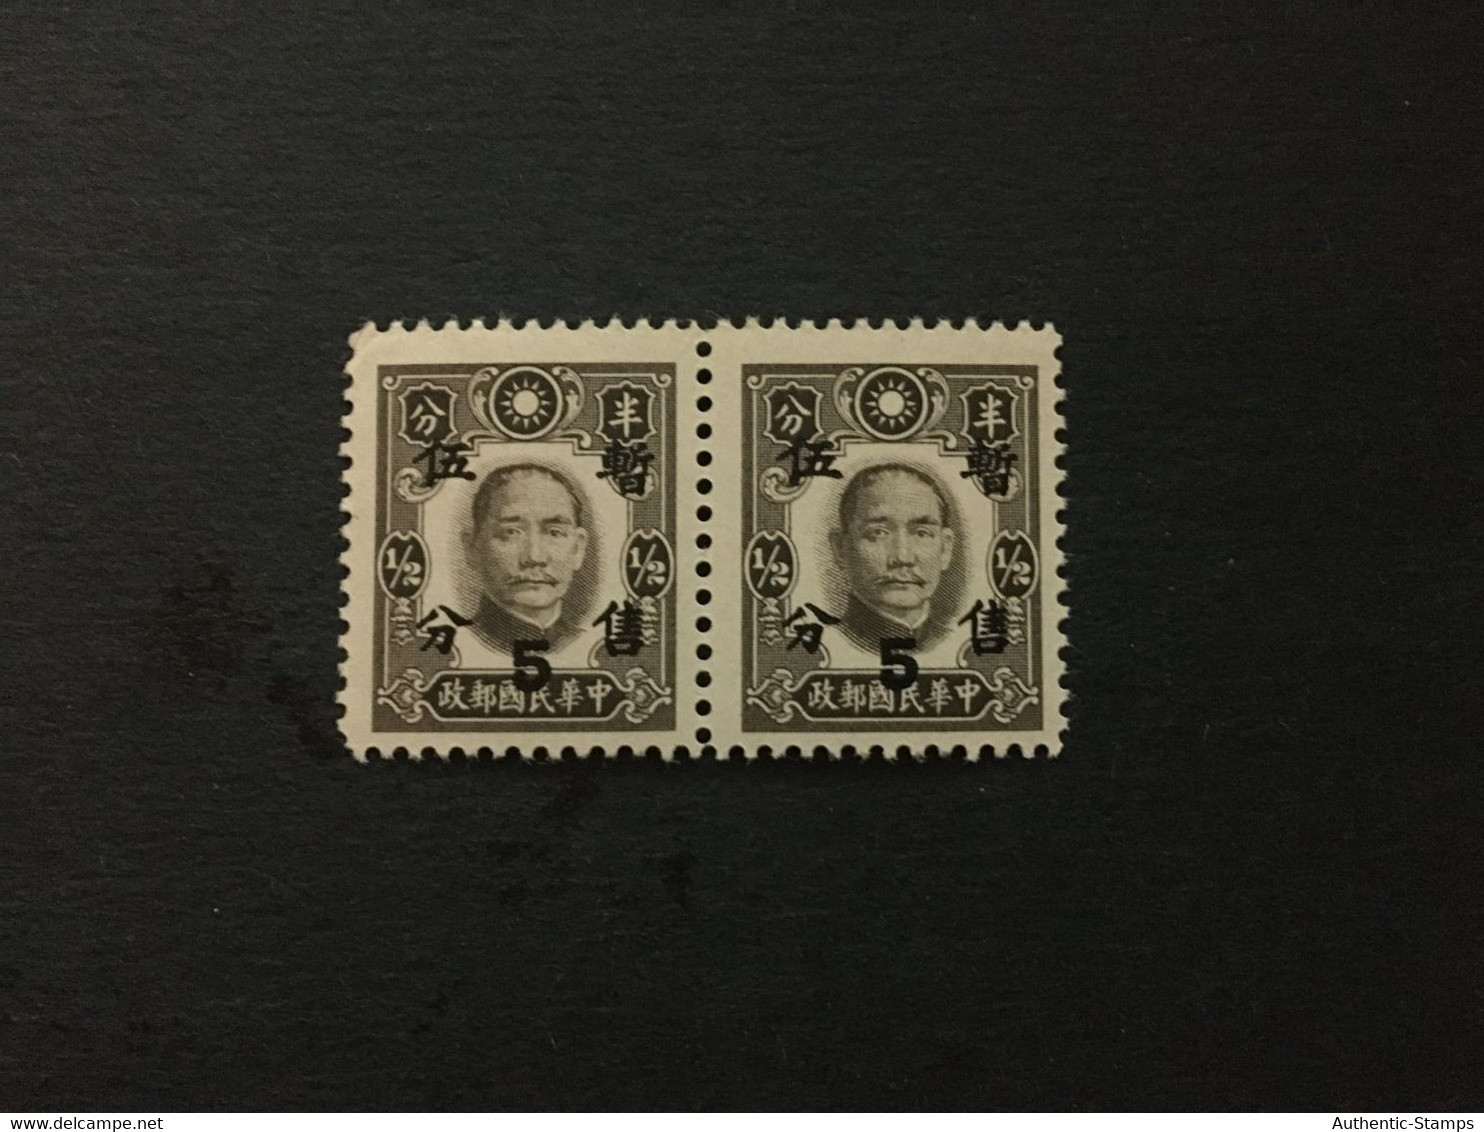 CHINA  STAMP BLOCK, MNH, JAPANESE OCCUPATION,Overprinted With “Temporarity Sold For”and Surcharged，CINA,CHINE,LIST 310 - 1943-45 Shanghai & Nanjing